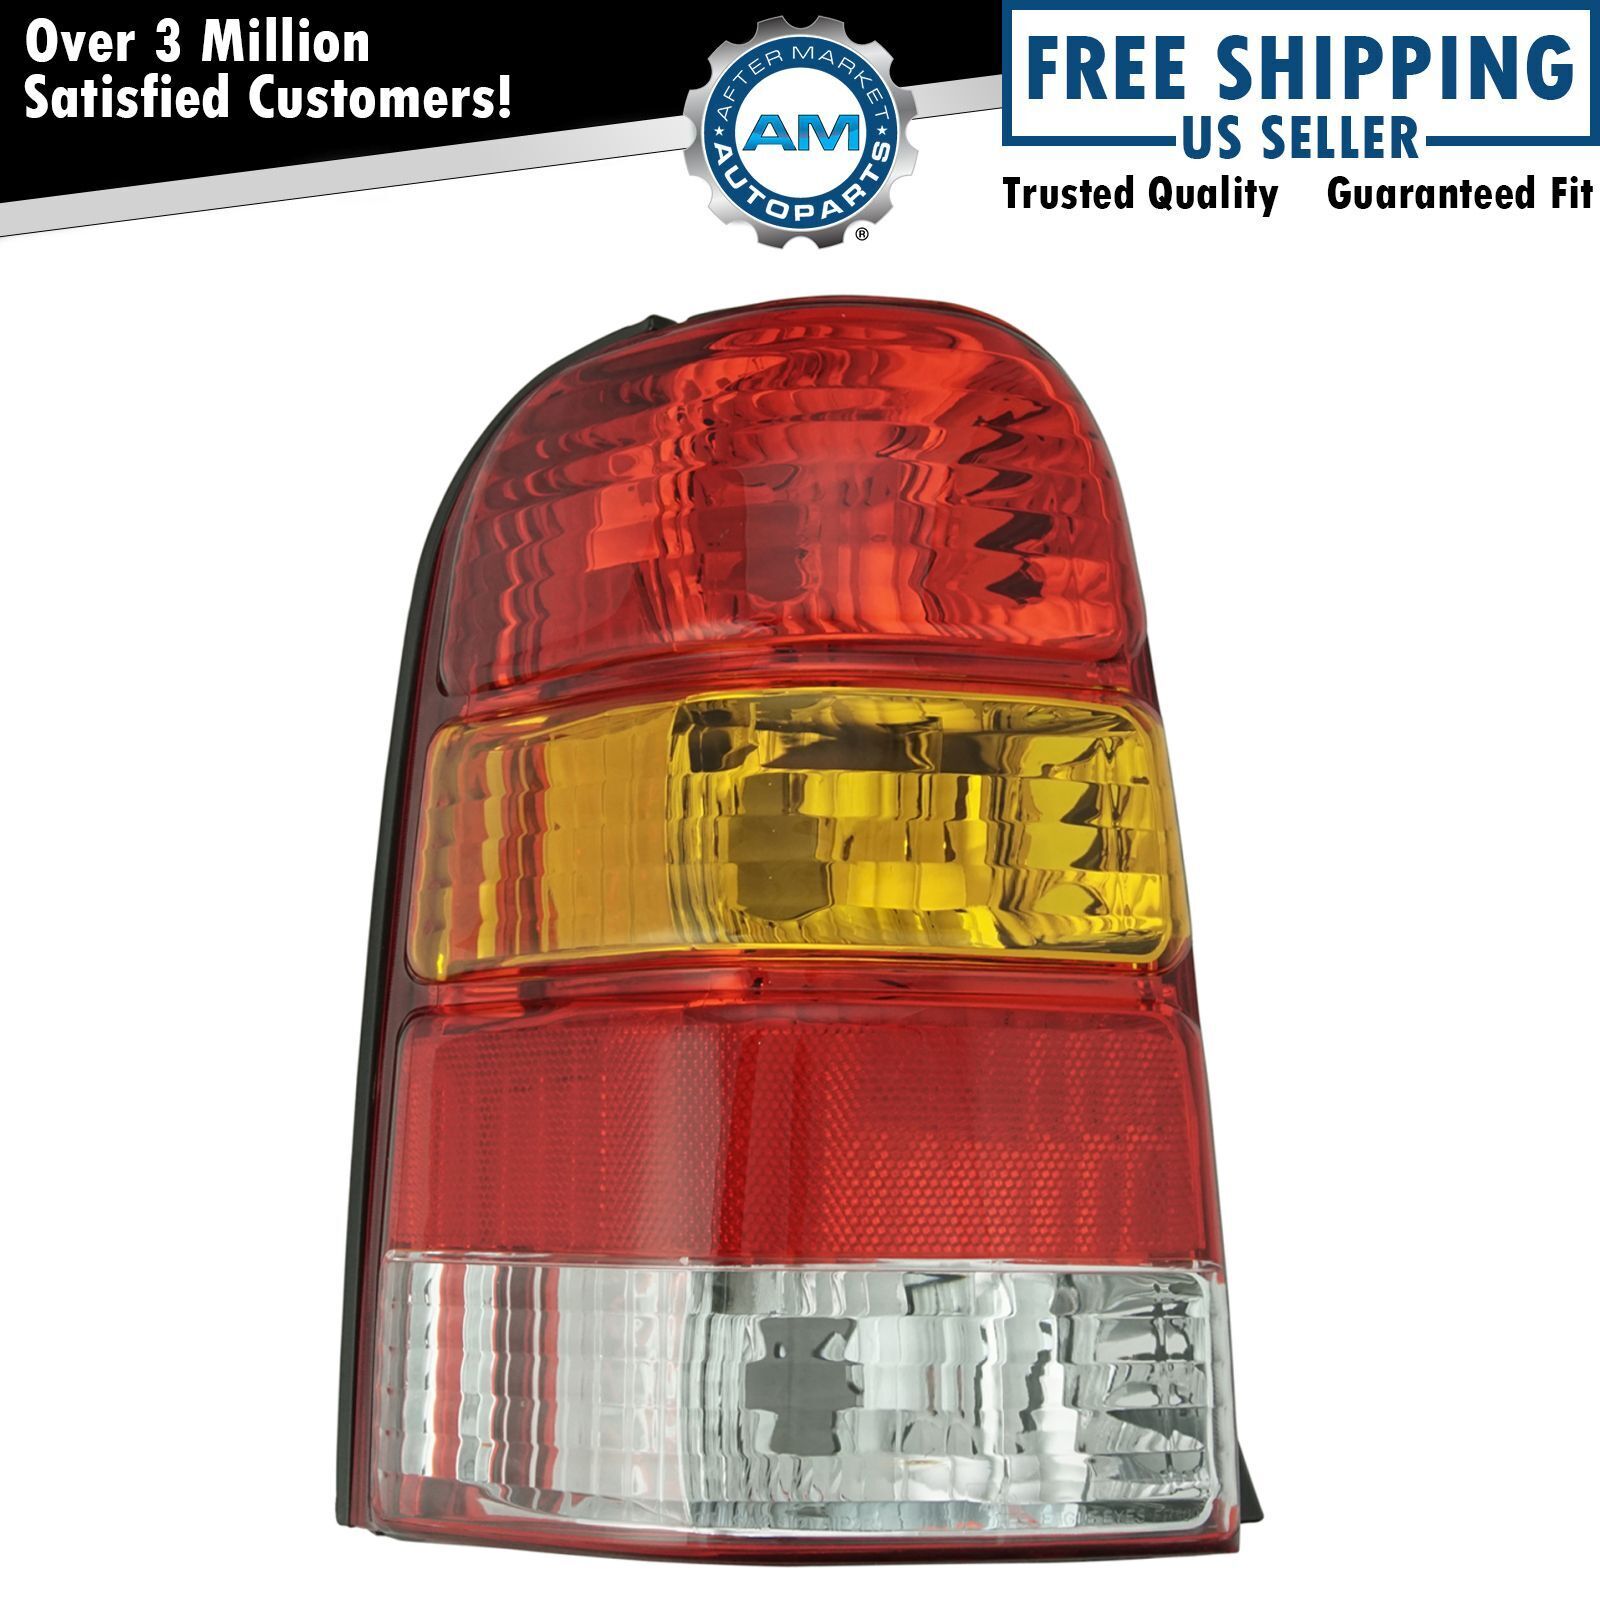 Taillight Taillamp Rear Brake Light Driver Side Left LH NEW for 01-07 Escape